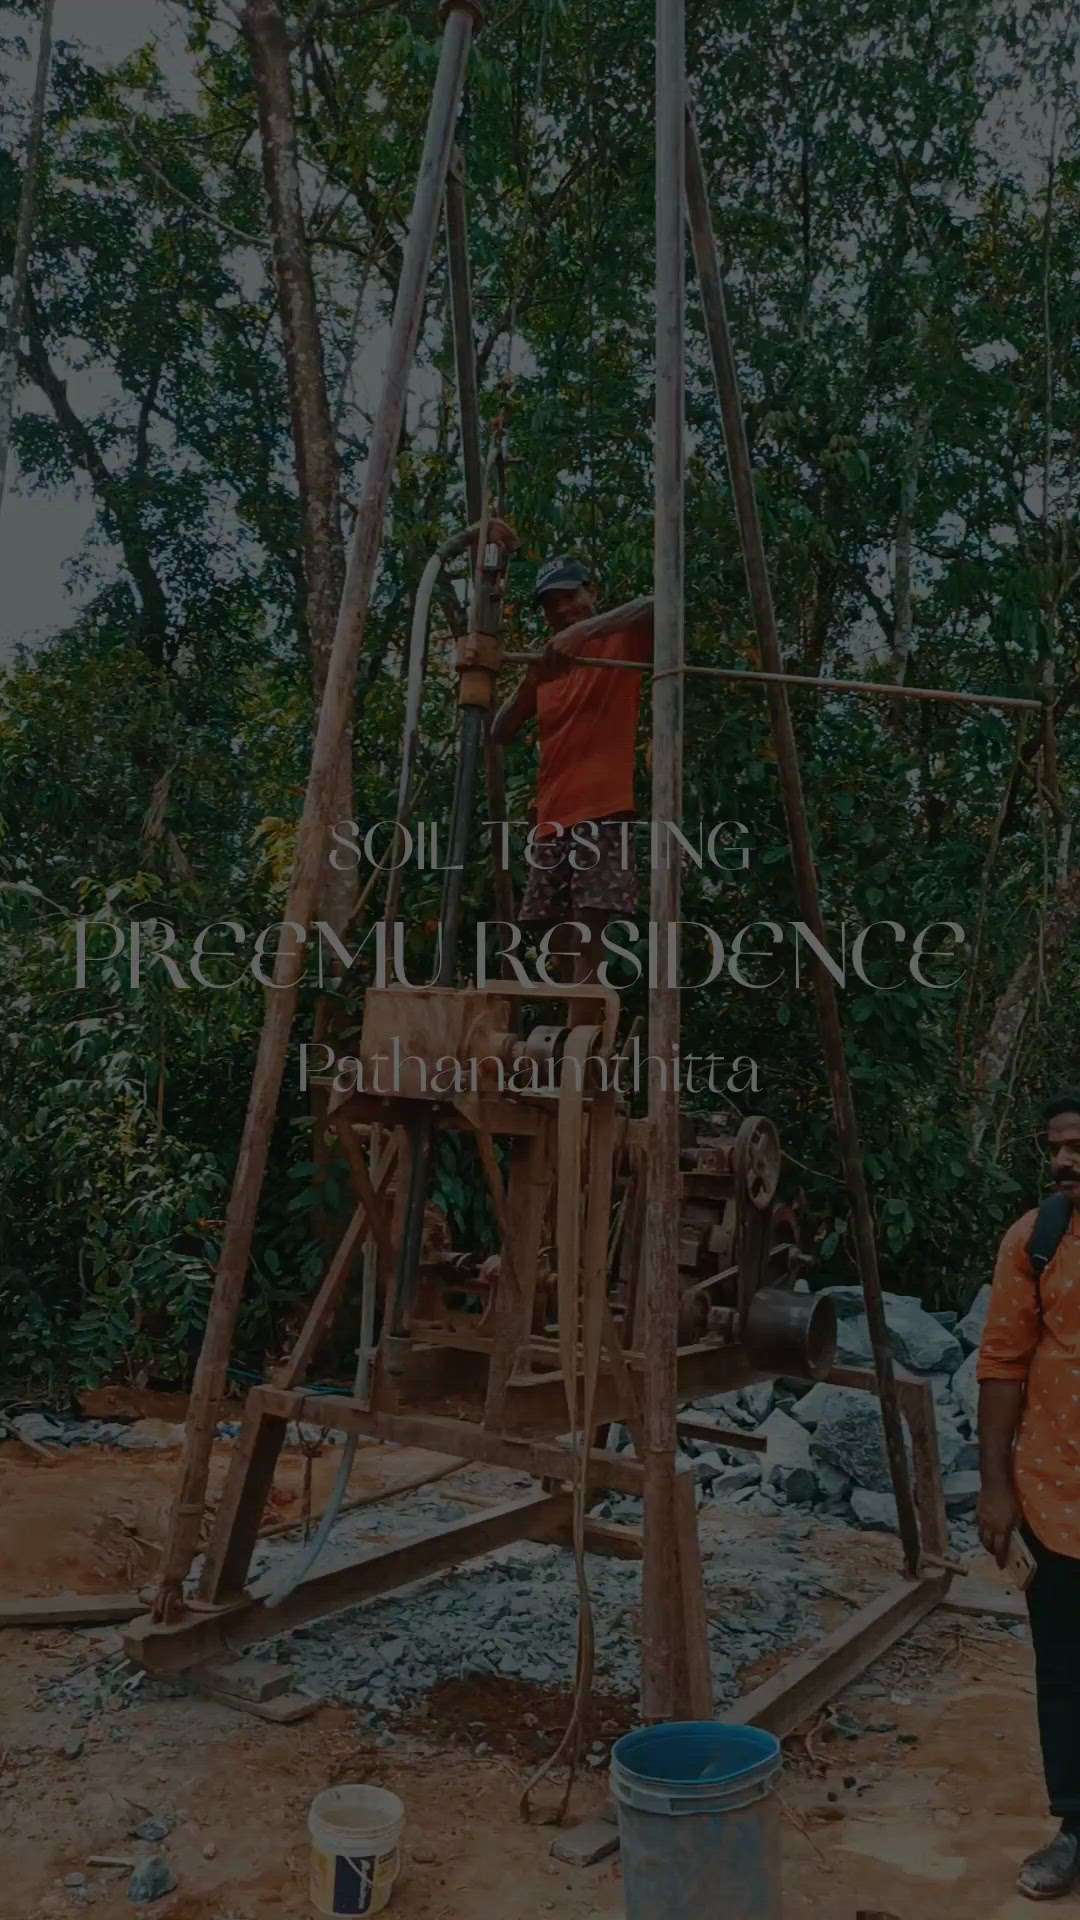 Preemu Residence 
Residence Construction 
Client - Preemu
Design - S.A.L.T India

 #ElevationDesign #ElevationHome #frontElevation #3delevation #facadedesign #profilelight #Kollam #Architect #architecturedesigns #architecture  #spatialuxdesigns #spatialuxdesign #spatialux #keralahomedesign #HouseConstruction #constructionsite #soiltest #soilinvestigation #construction  #kerala_constructions #interior_and_construction #sitestories #site #sitediaries #siteexecution